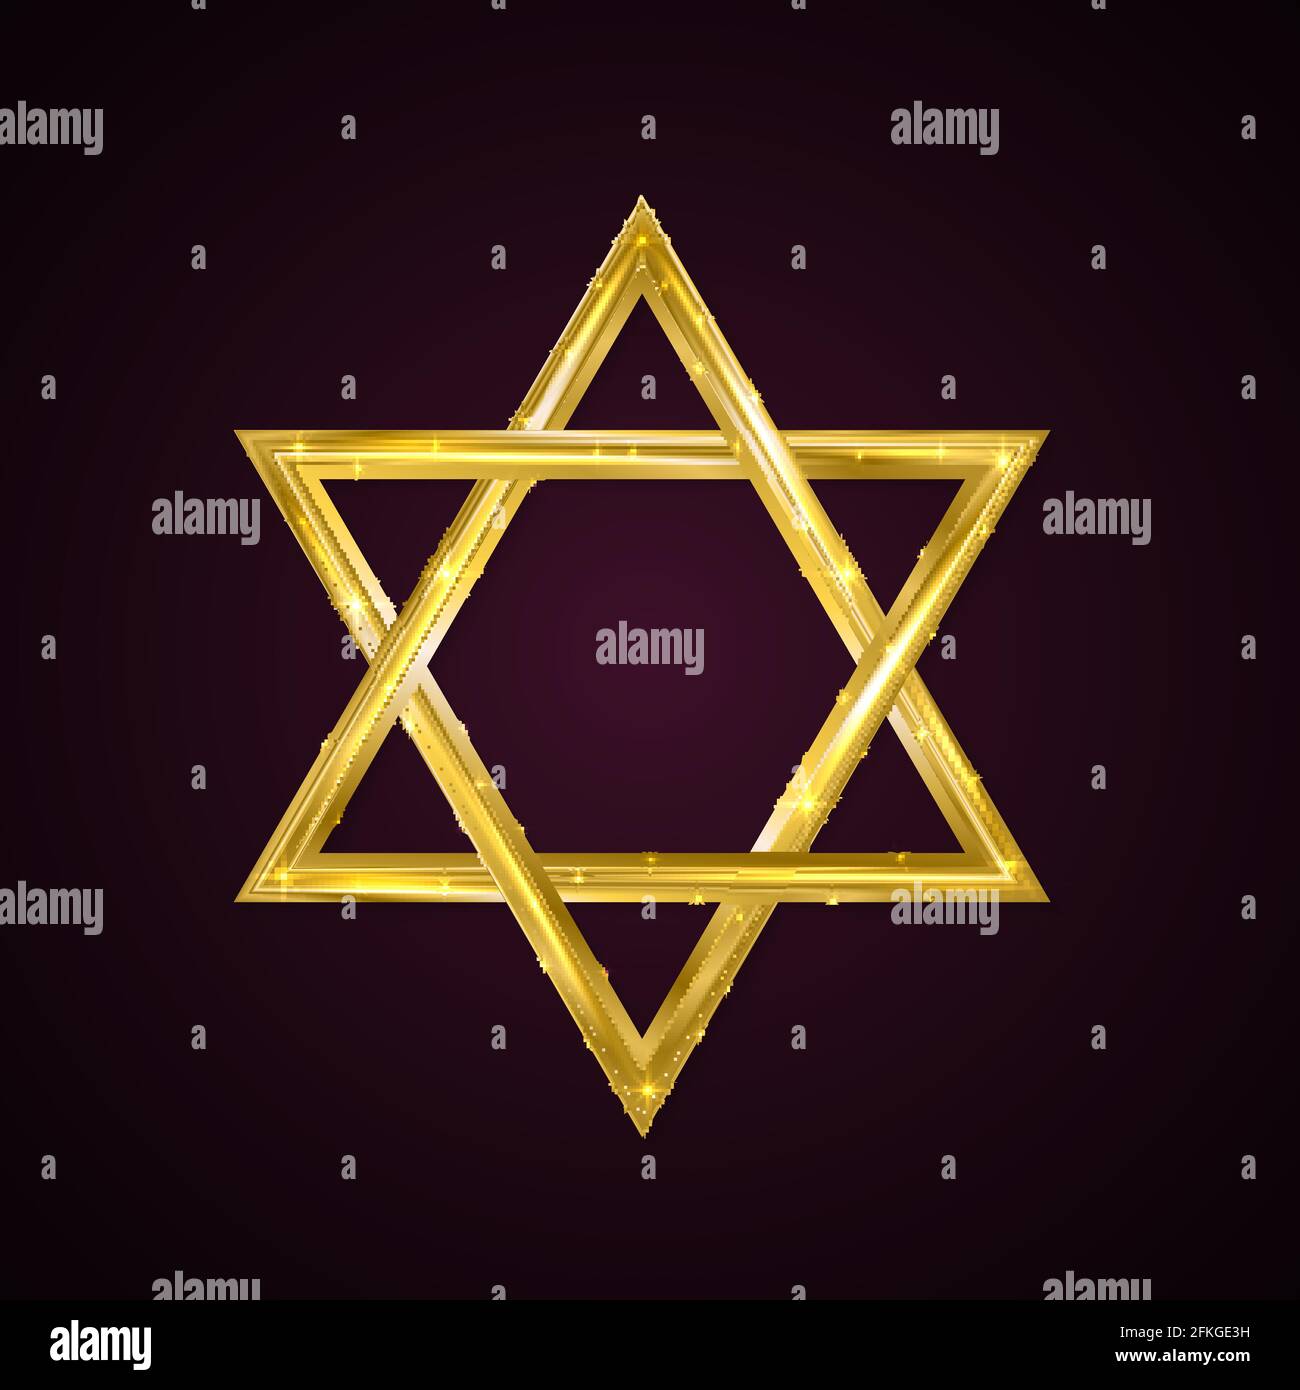 Jewish Star of David. Golden six-pointed star on a dark background. 3d realistic hexagonal figure. Gold Magen David. Vector icon. Easy to edit templat Stock Vector